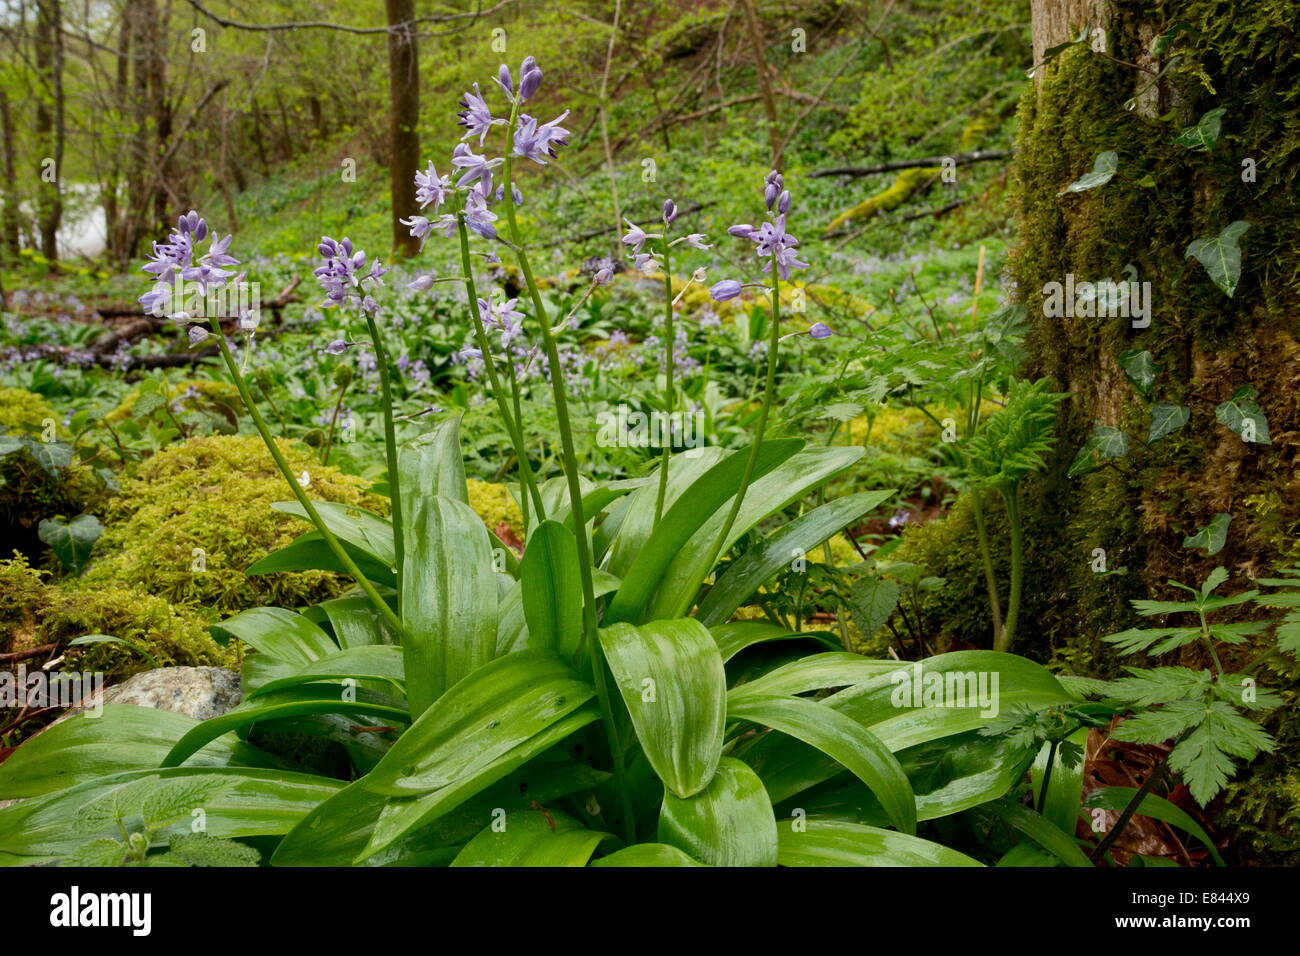 Pyrenean Squill, Scilla lilio-hyacinthus in woodland in spring, french Pyrenees. France. Stock Photo